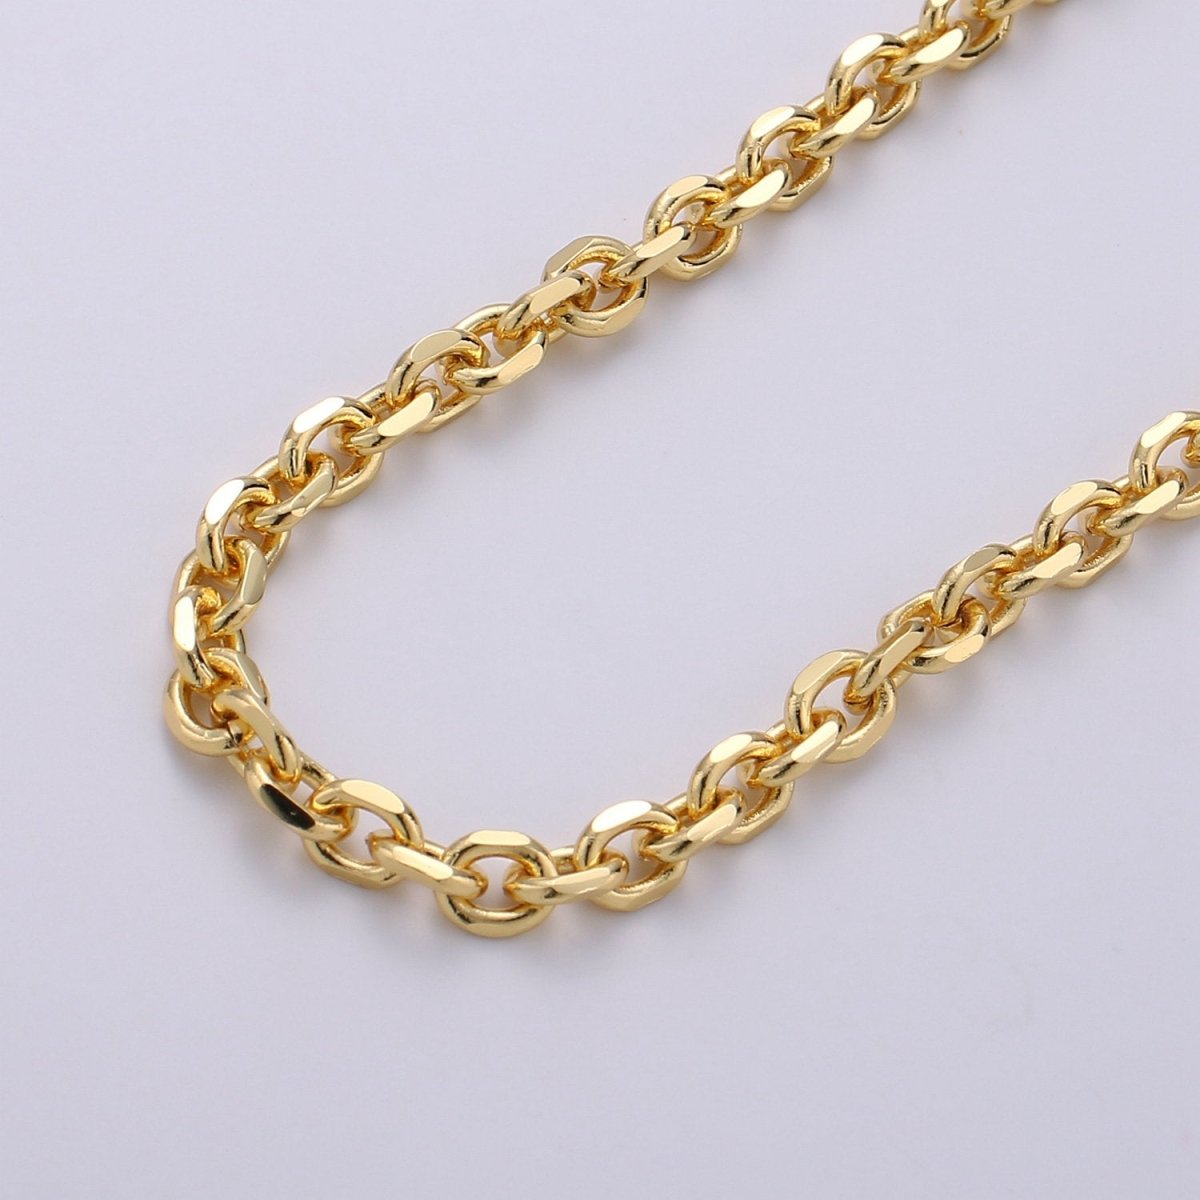 Oval Gold ROLO Cable Chain, 24k Gold Filled Chain by the yard of Thick Cable chain 4mm width | ROLL-235 Overstock Clearance Pricing - DLUXCA